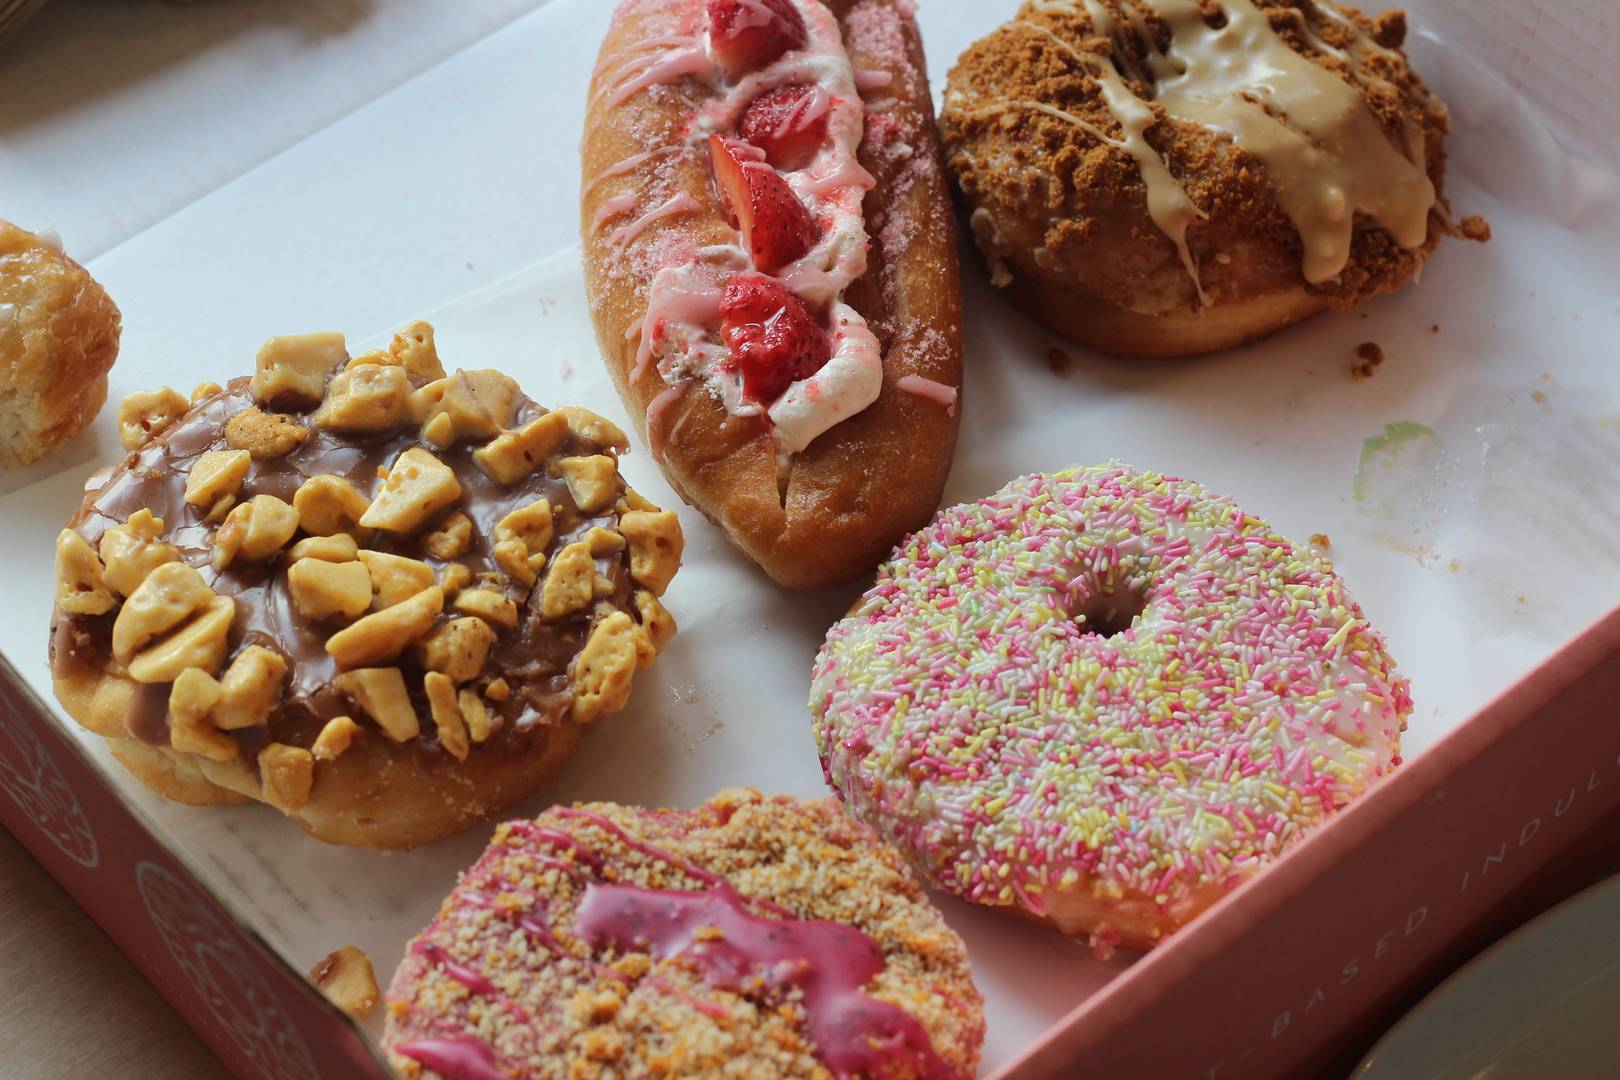 Image of donuts in box